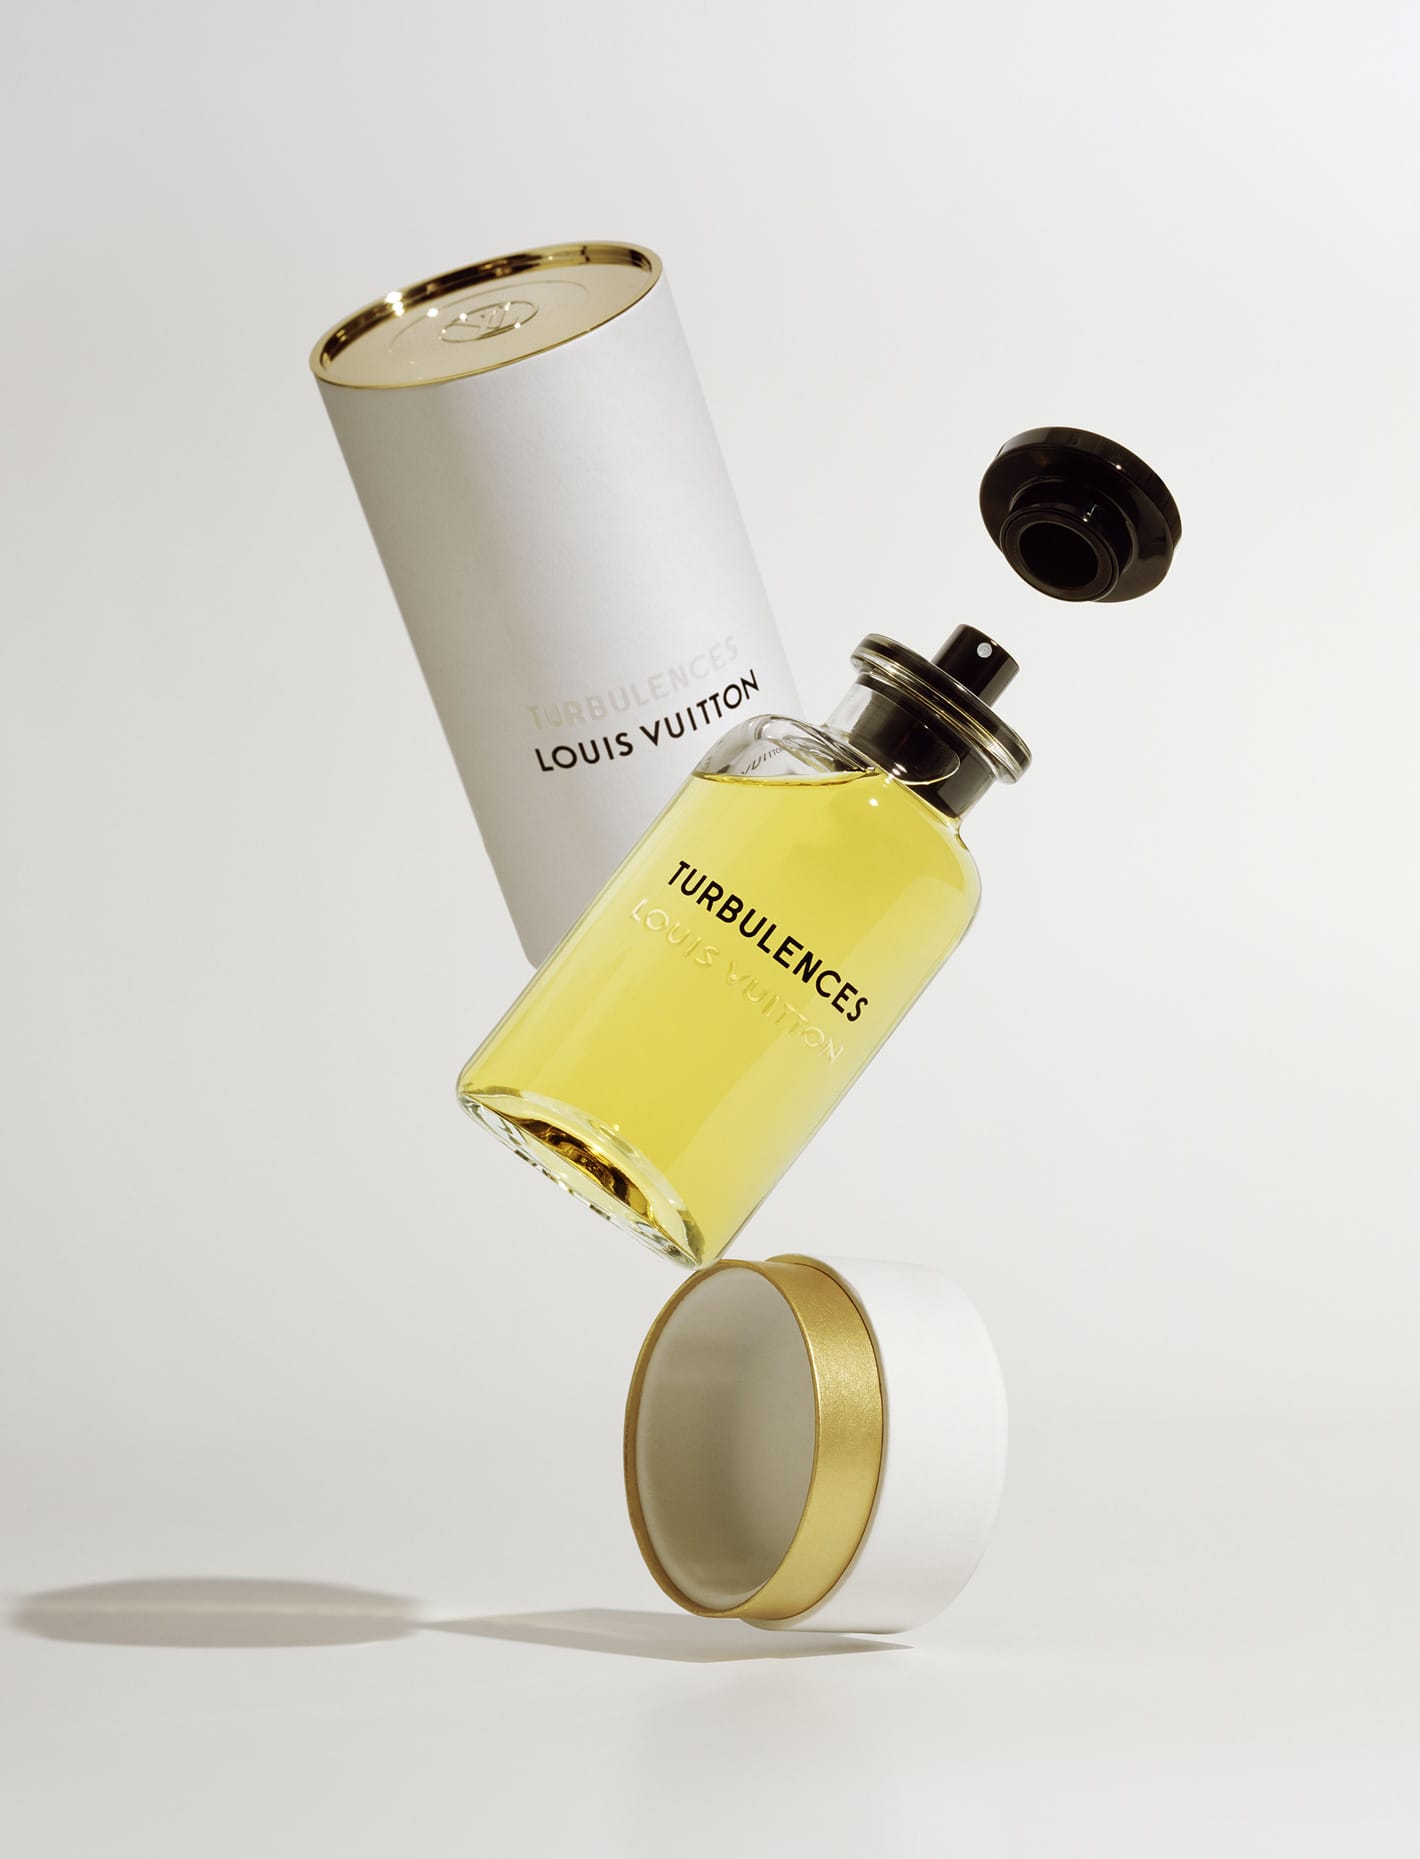 Louis Vuitton Opens Their Doors To The World Of Fragrance | The Extravagant